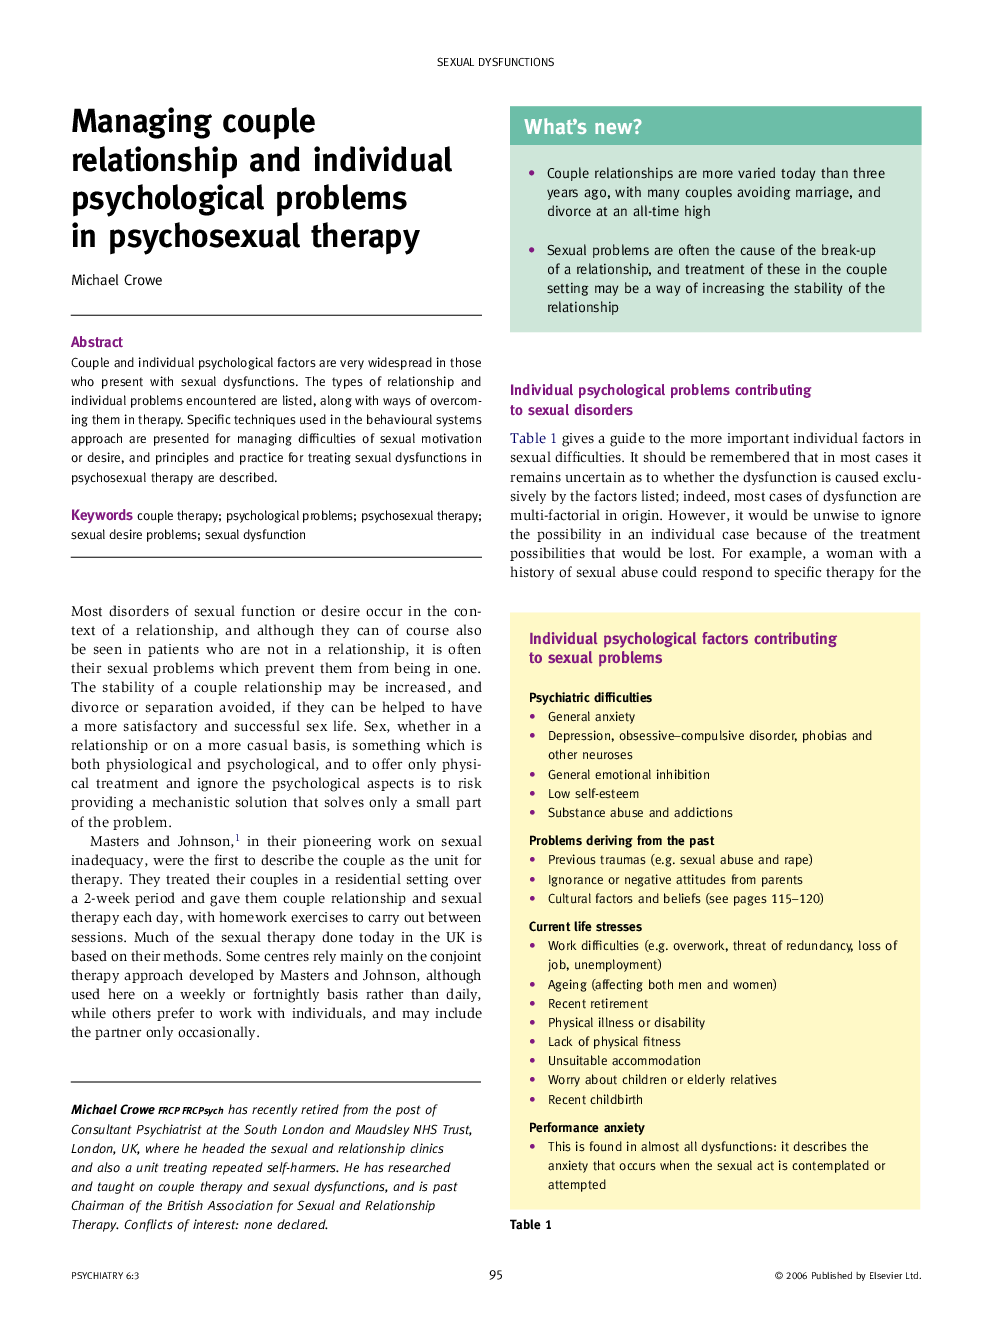 Managing couple relationship and individual psychological problems in psychosexual therapy